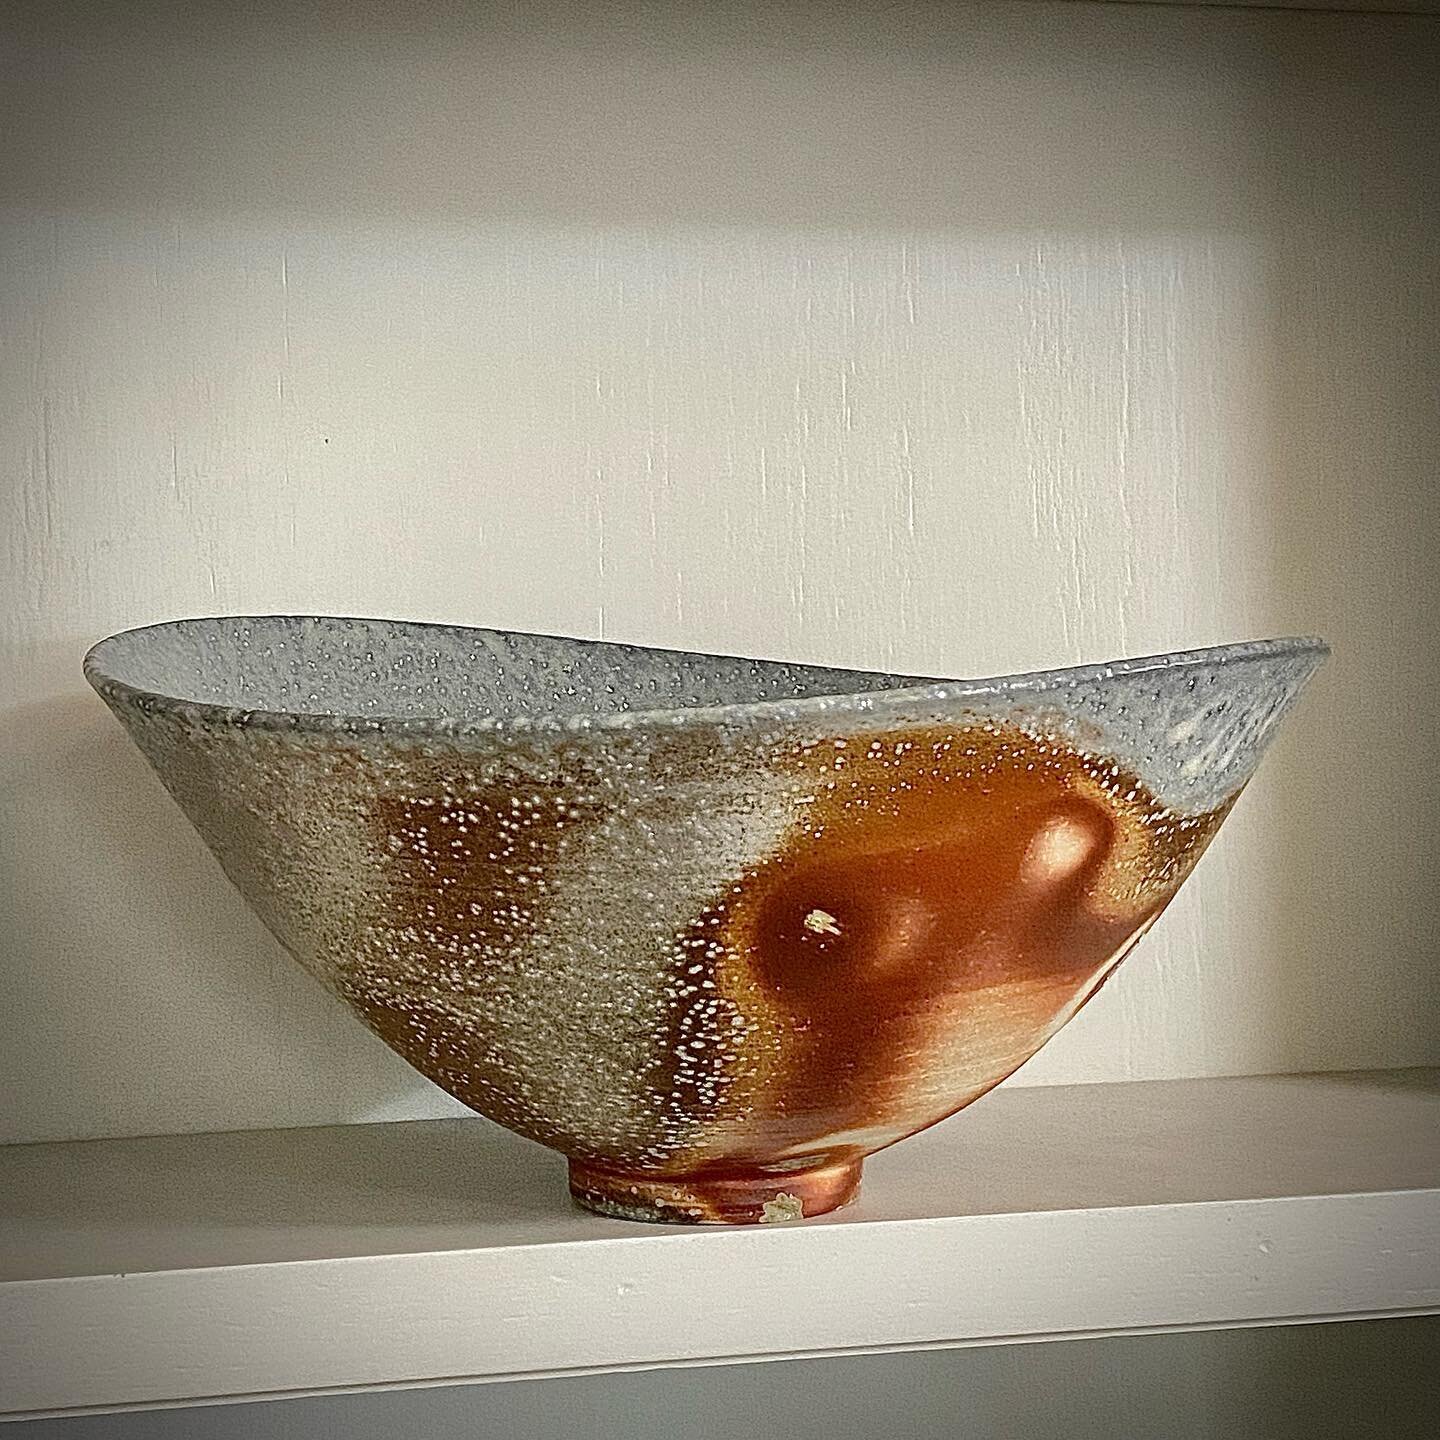 Tall bowl fired on its side in my recent soda firing.